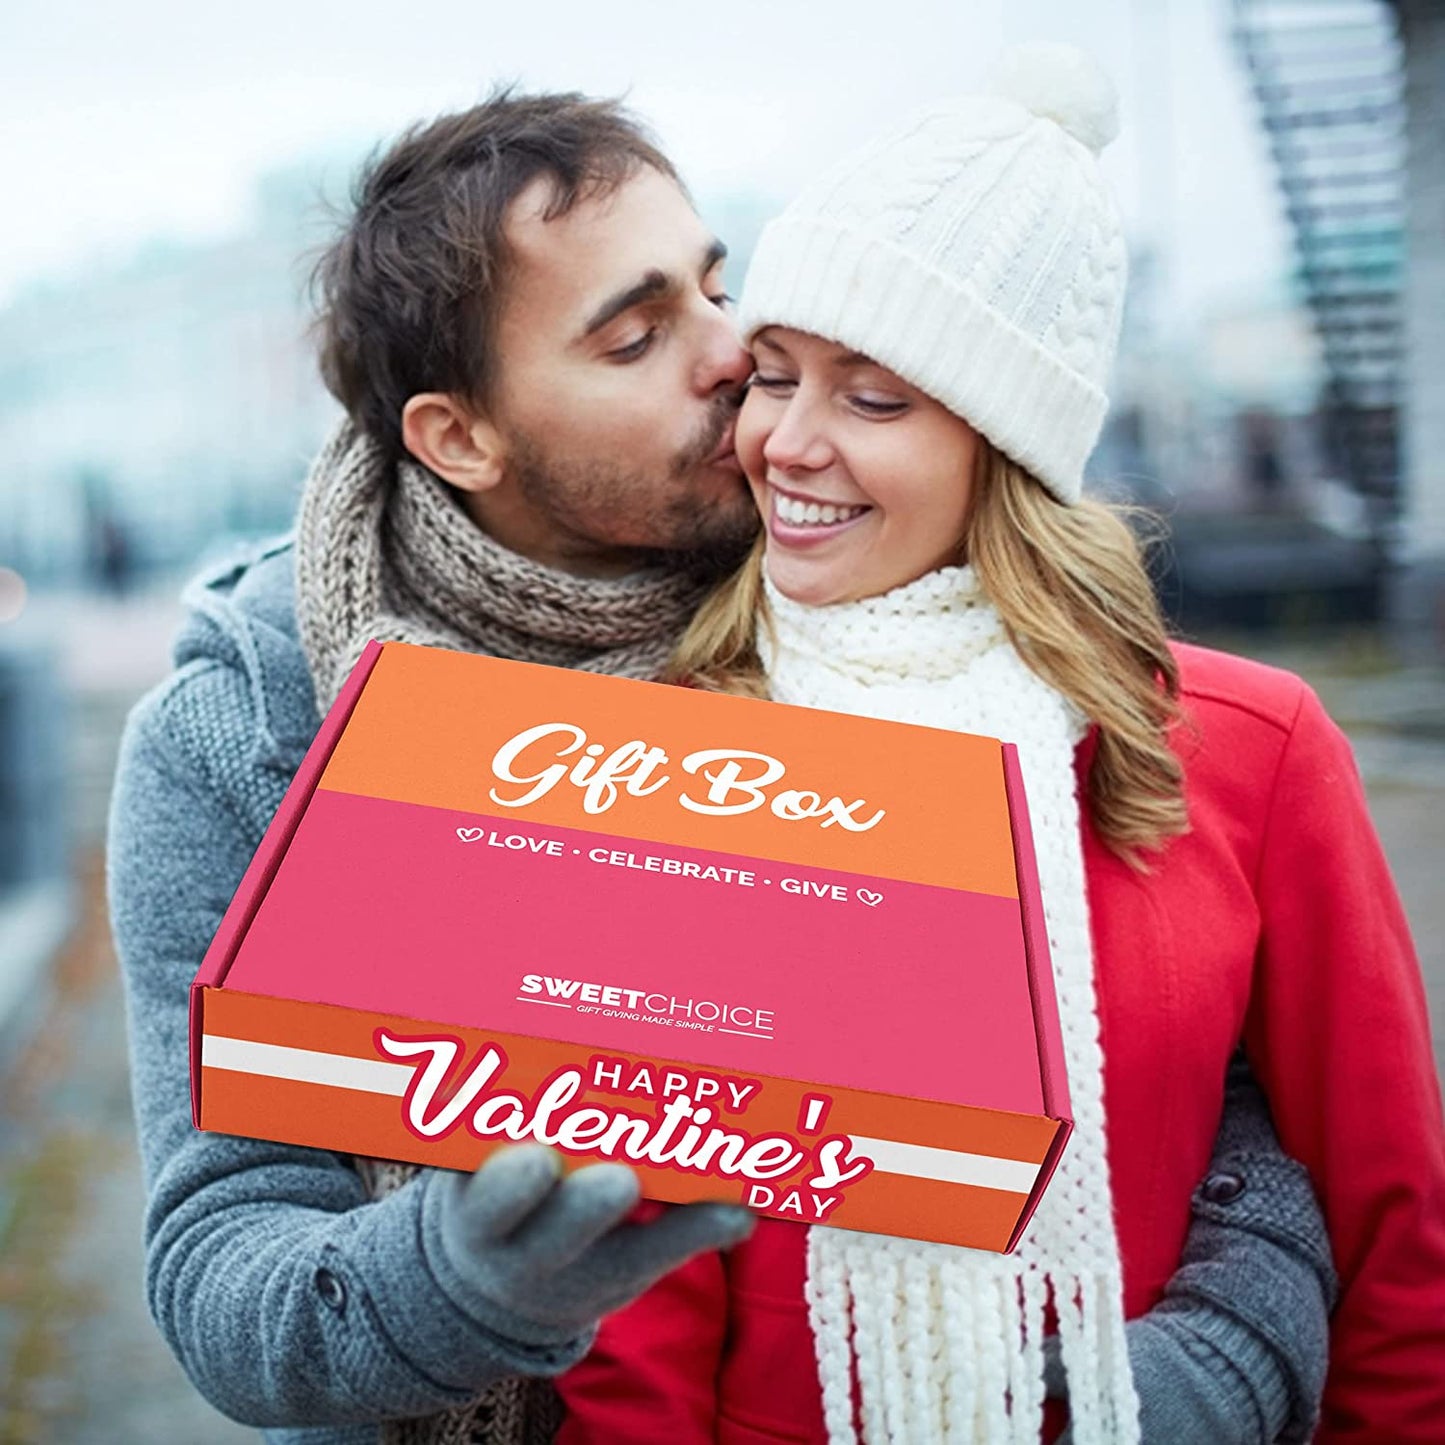 Valentine's Day Care Package (45ct) Snacks Chocolates Candy Gift Box Assortment Variety Bundle Crate Present for Boy Girl Friend Student College Child Husband Wife Boyfriend Girlfriend Love Niece